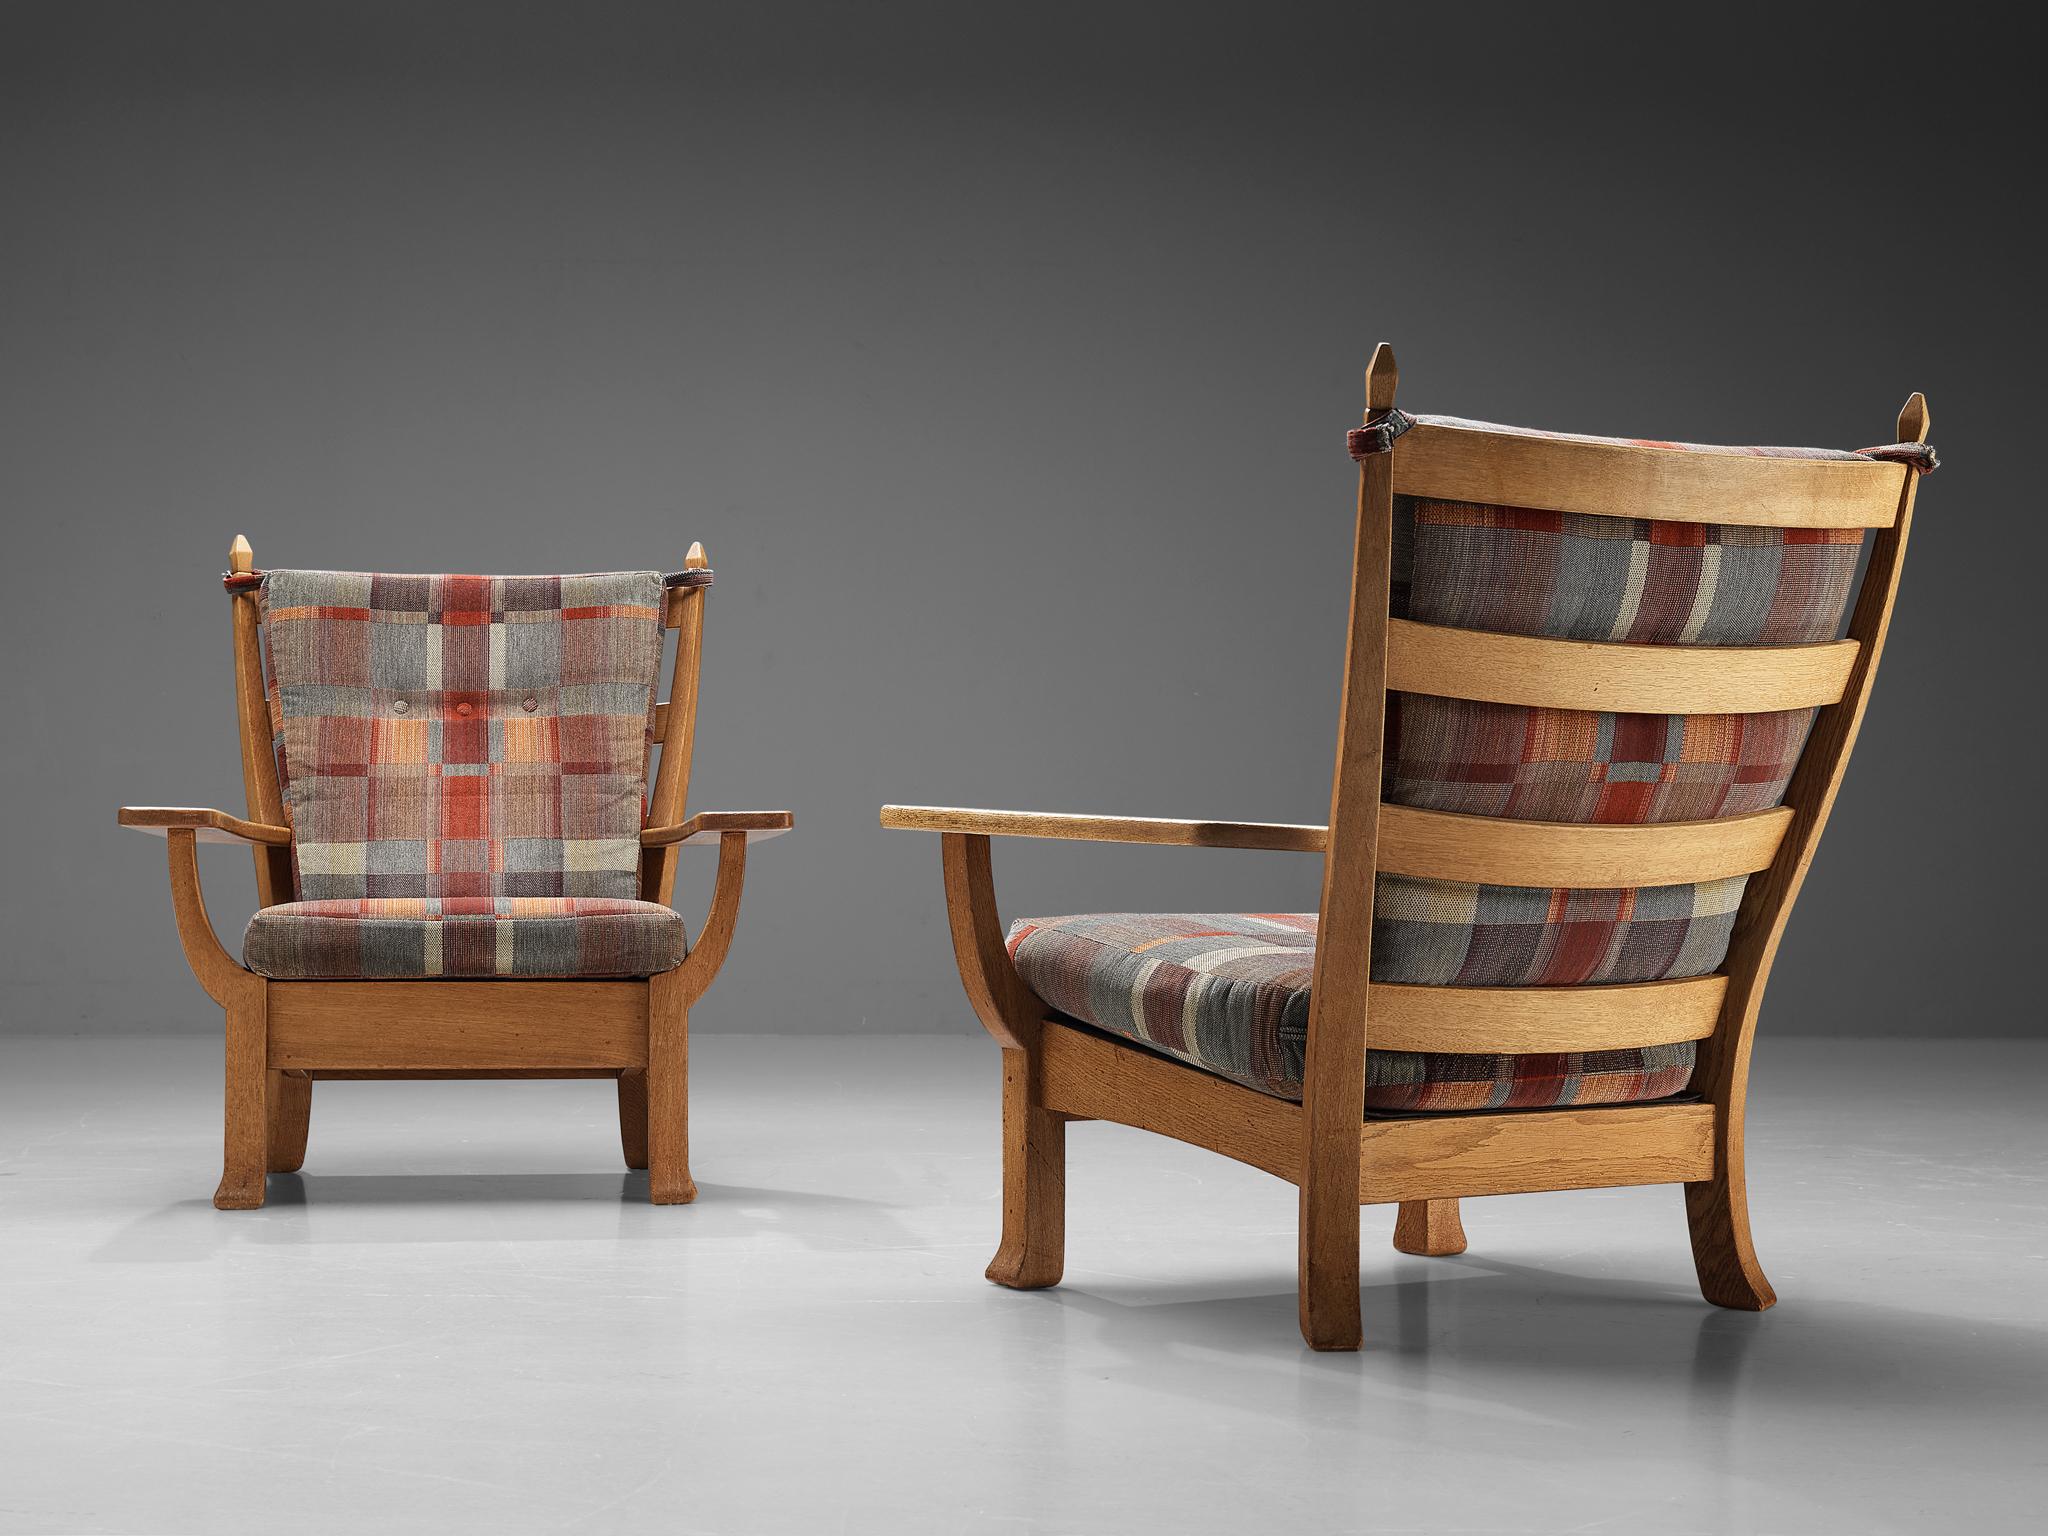 Pair of armchairs, oak, fabric, Europe, 1960s 

These exquisite pair of lounge chairs are well-executed embodying a solid construction. With its imposing, elongated backrest, this design is suitable as either the heart of your interior or its focal